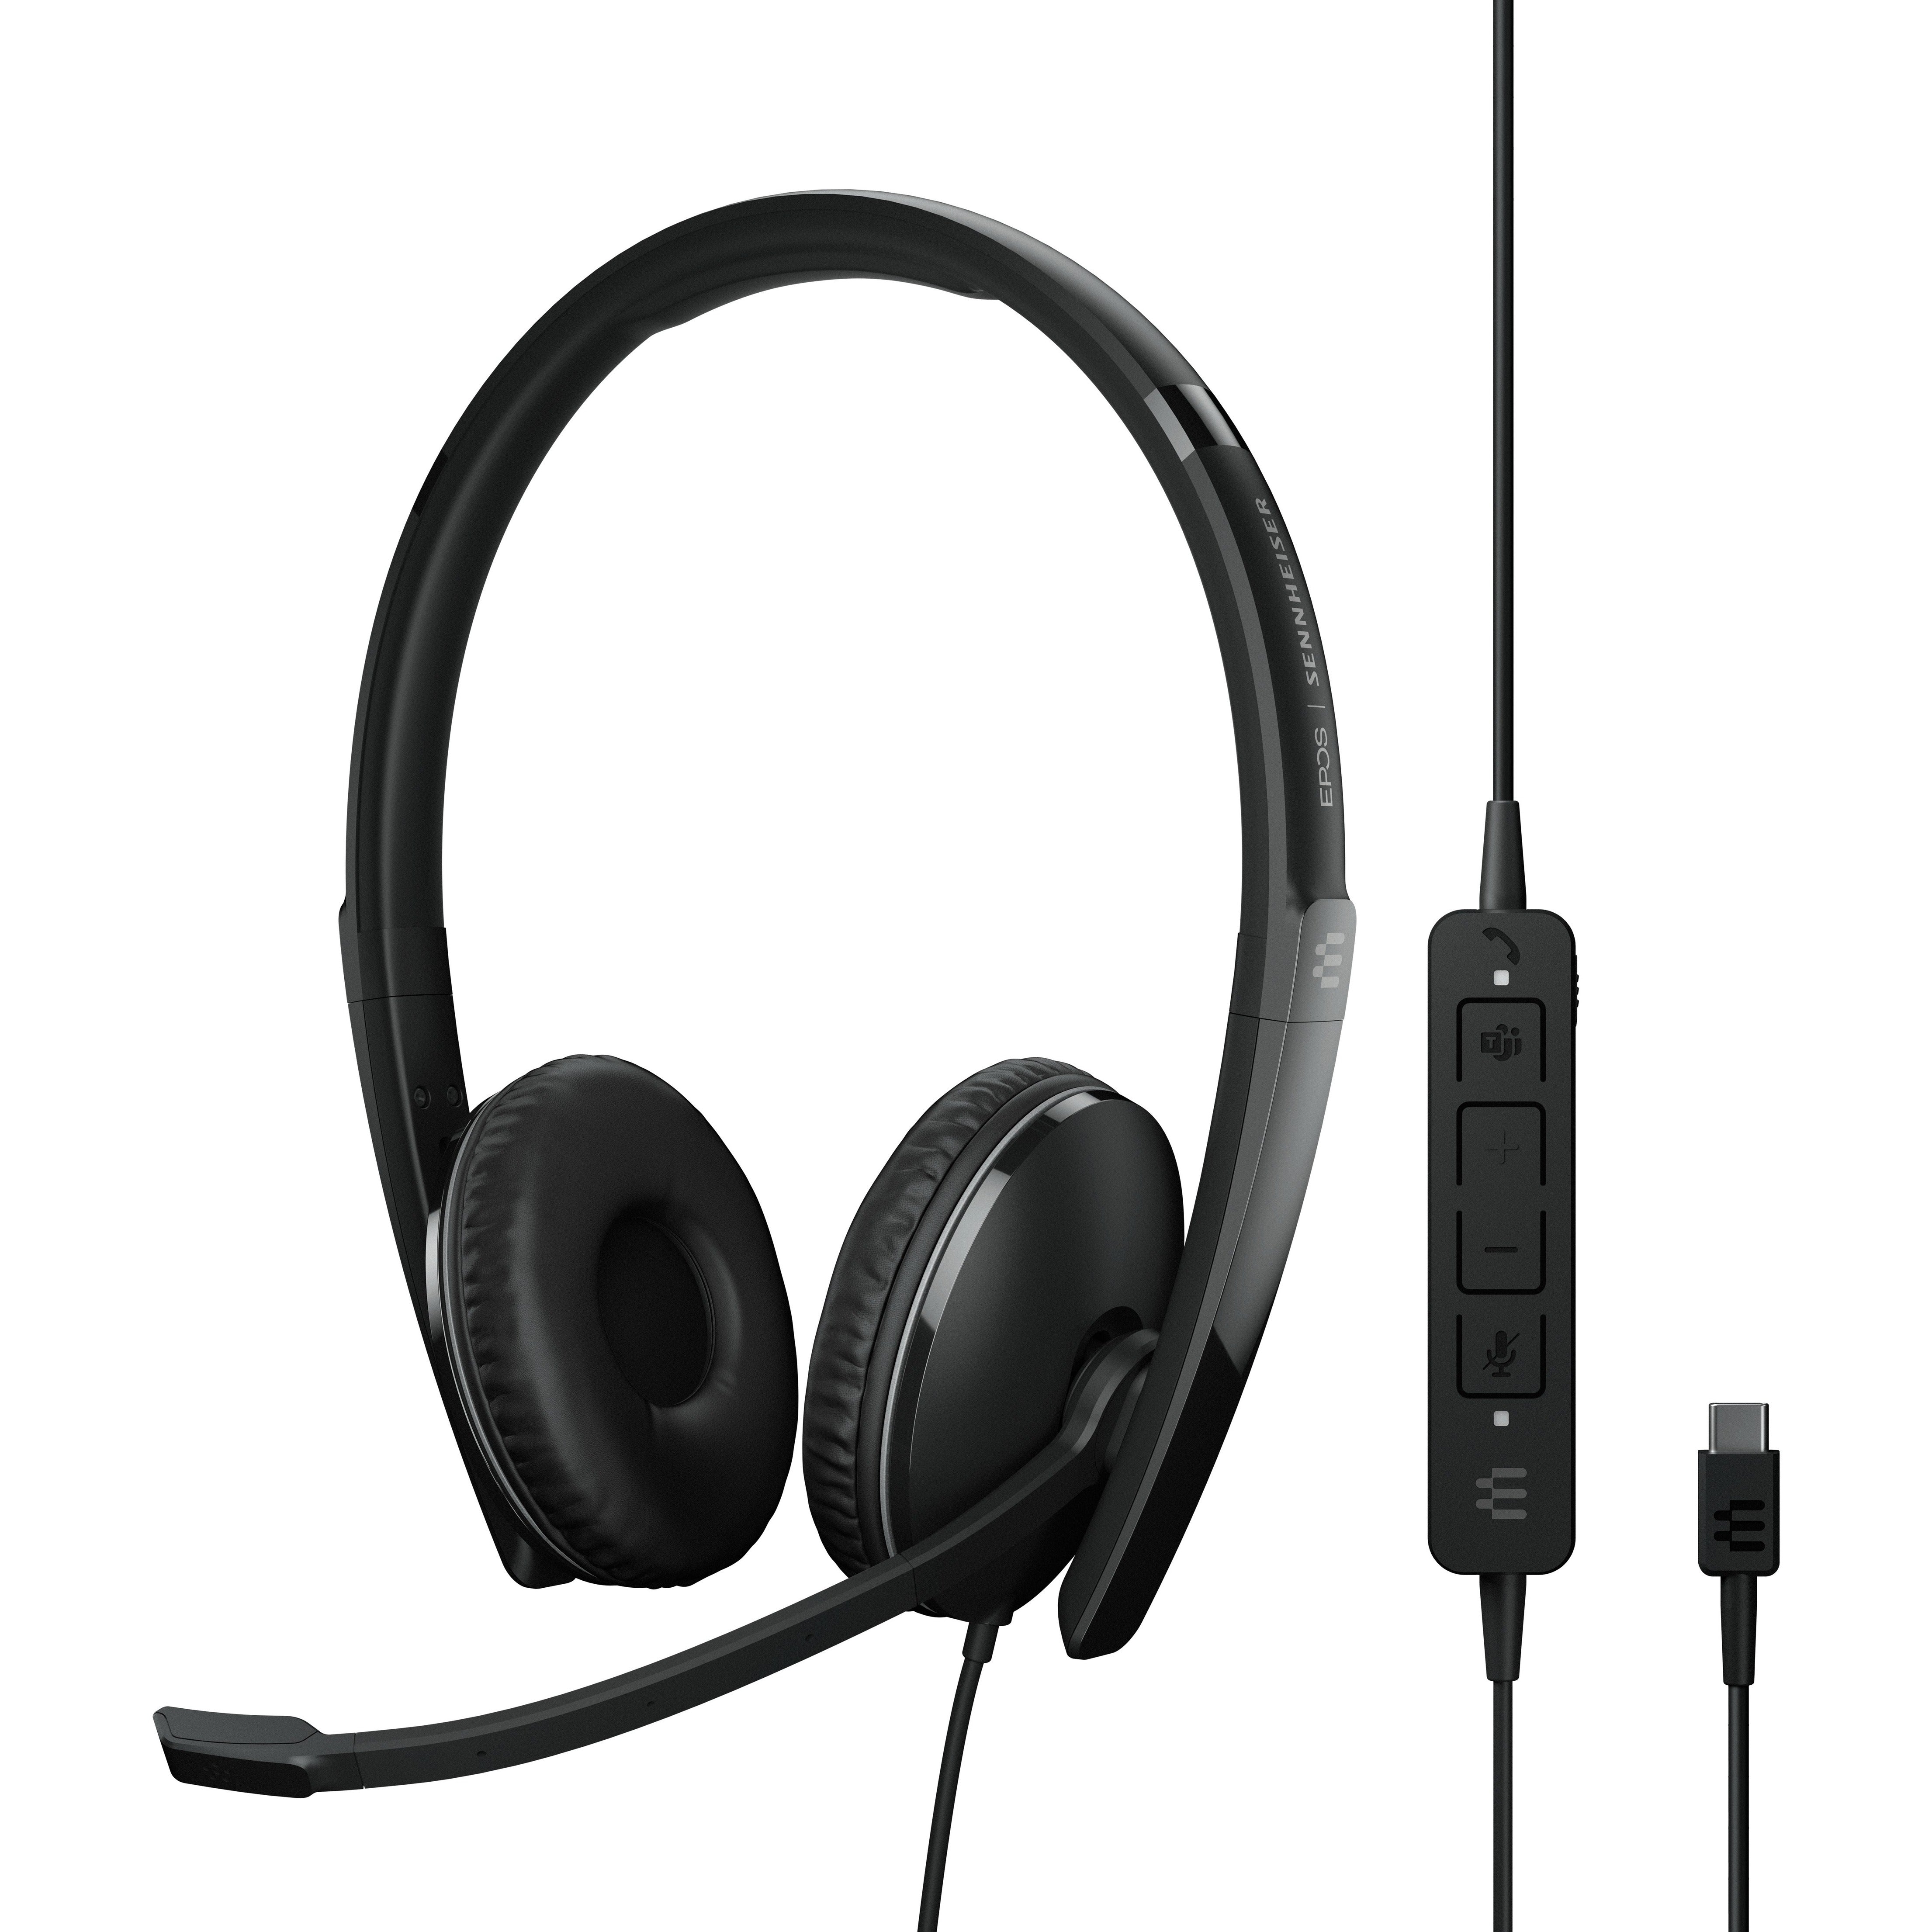 EPOS | SENNHEISER 1000221 ADAPT 160T ANC USB-C Headset, Noise Cancelling, Microsoft Teams Certified and UC